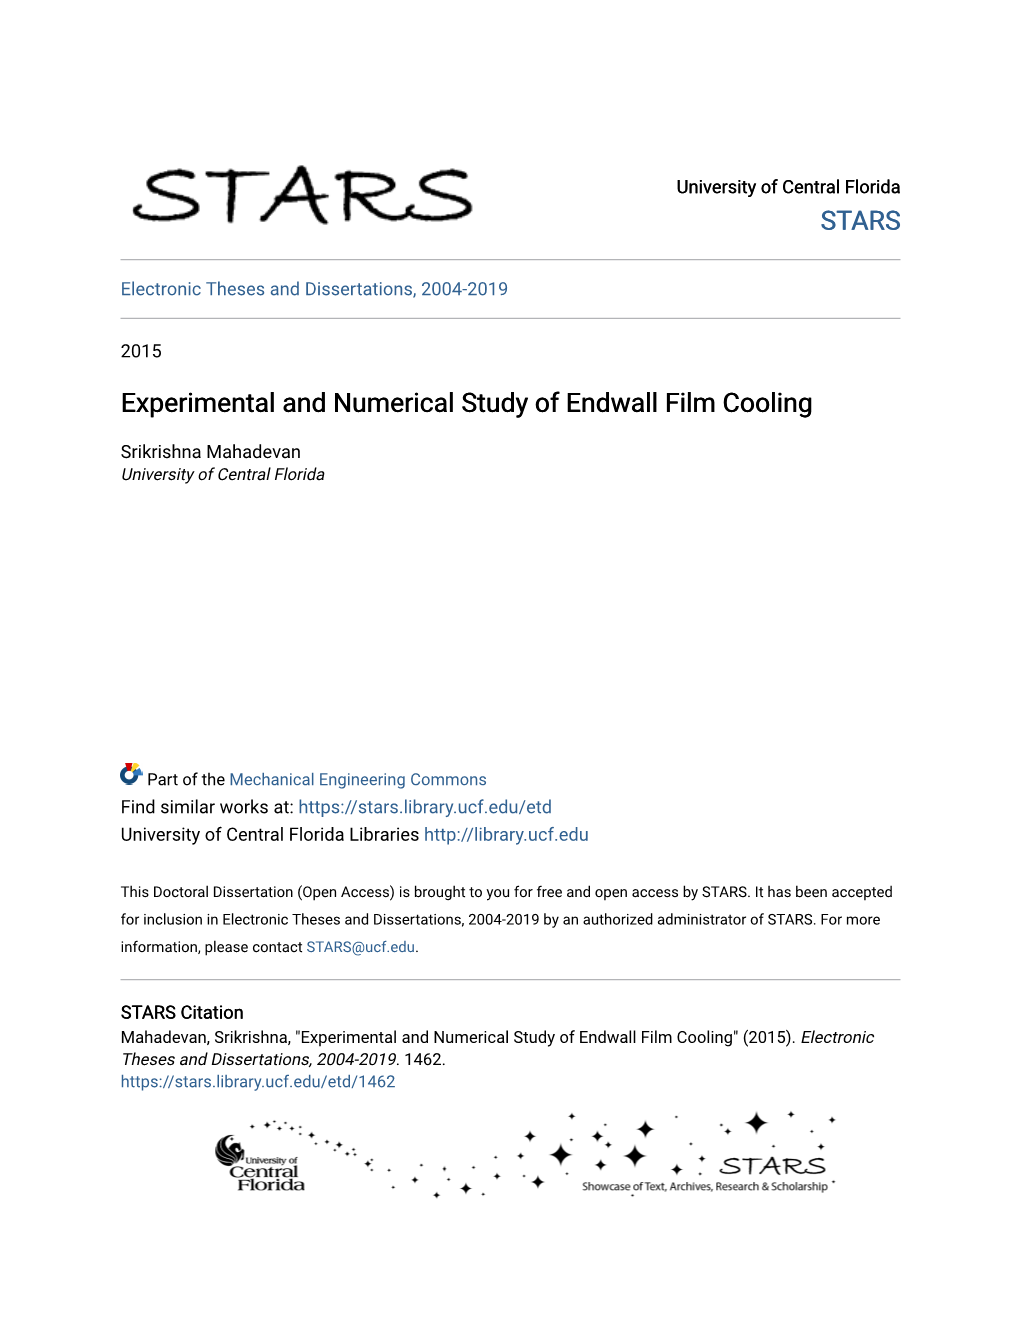 Experimental and Numerical Study of Endwall Film Cooling